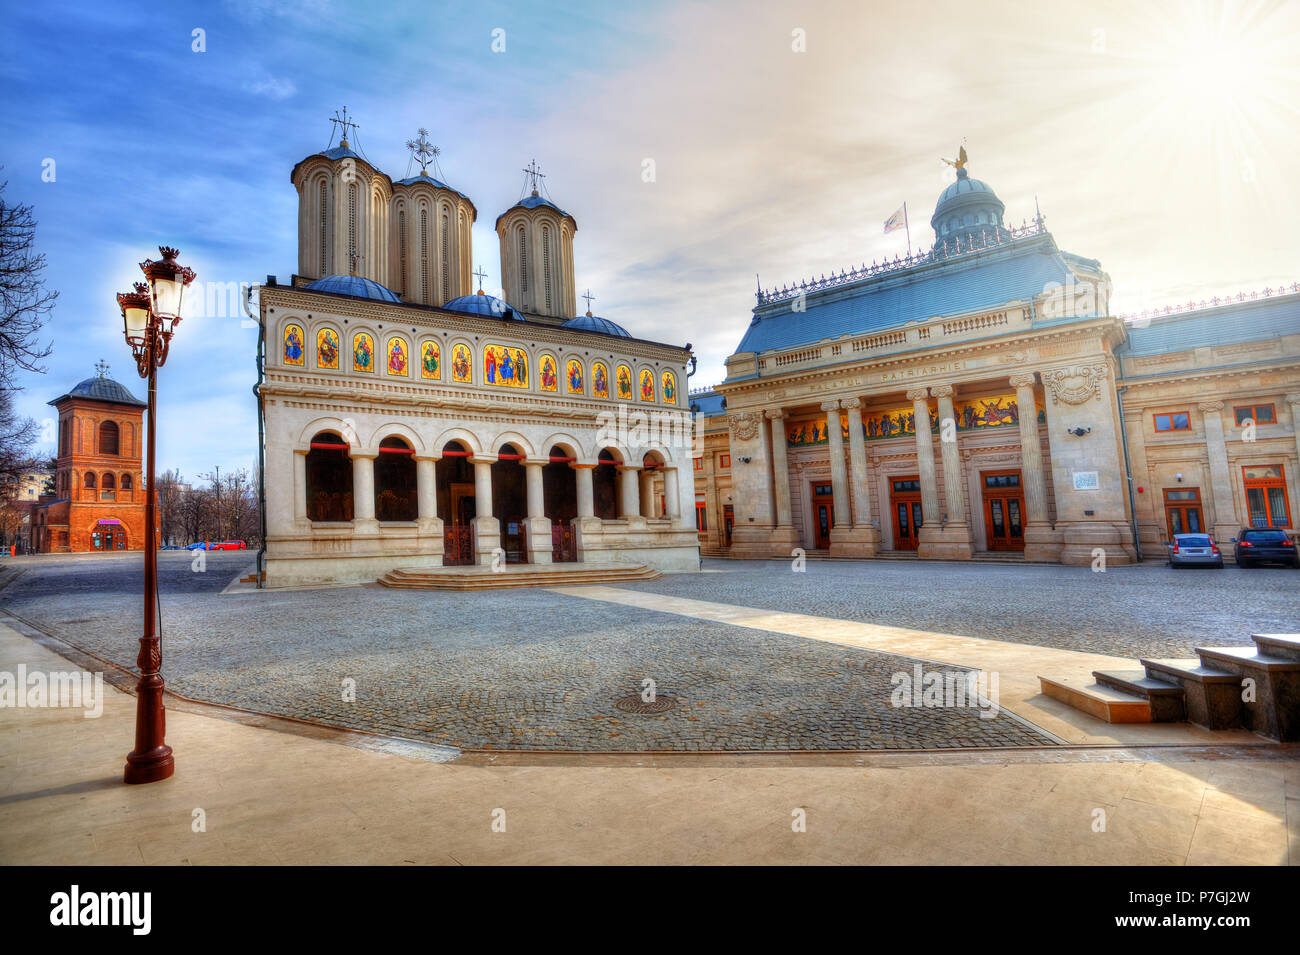 Famous religious Patriarchal church of Bucharest, spiritual edifice of Christian Orthodox comunity considered as the most beautiful cathedral of Roman Stock Photo